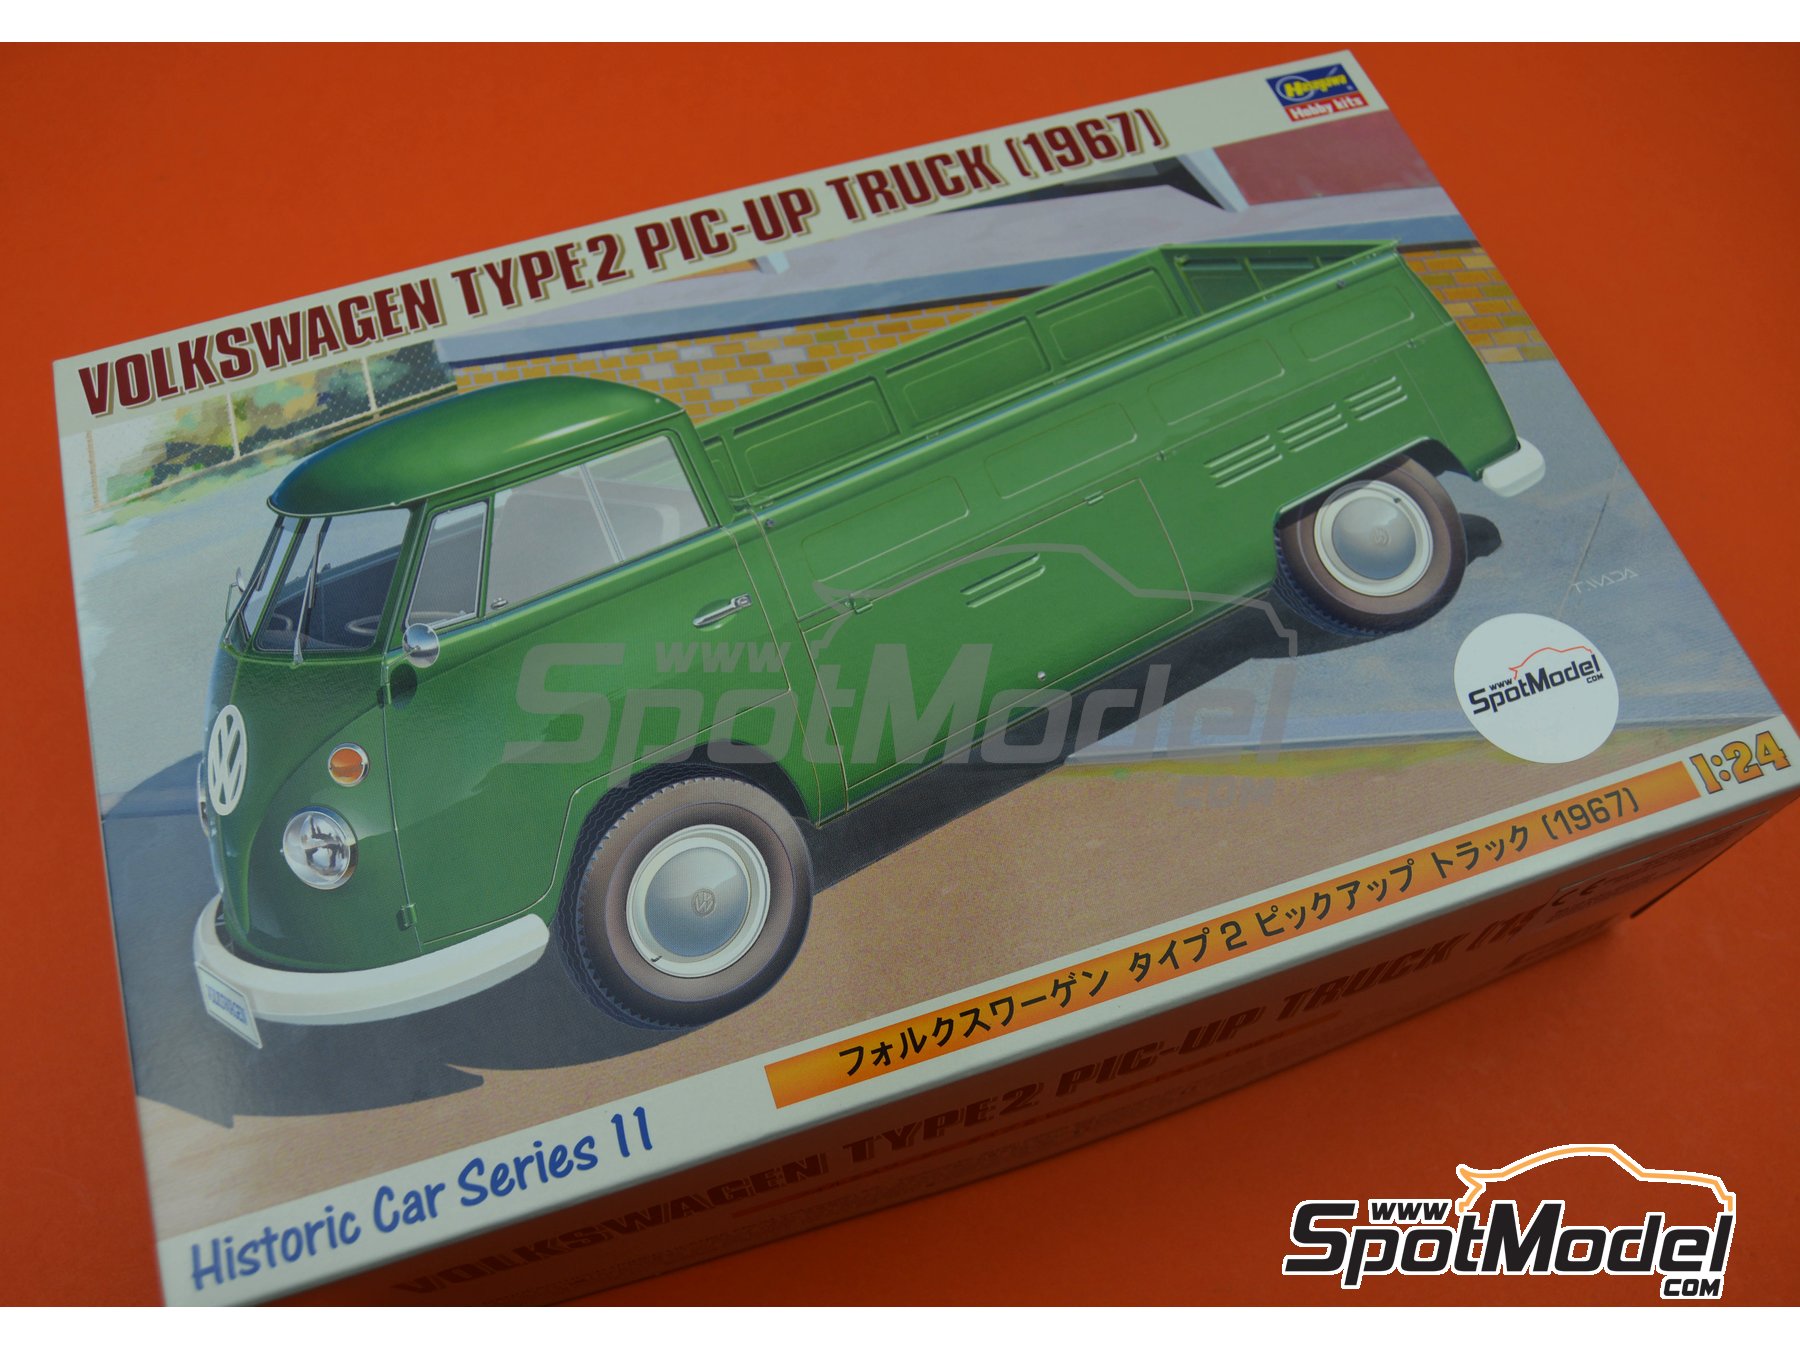 Details about   Spare Wheel For Ottomobile G026 1/12 Transkit Resin VW T2 